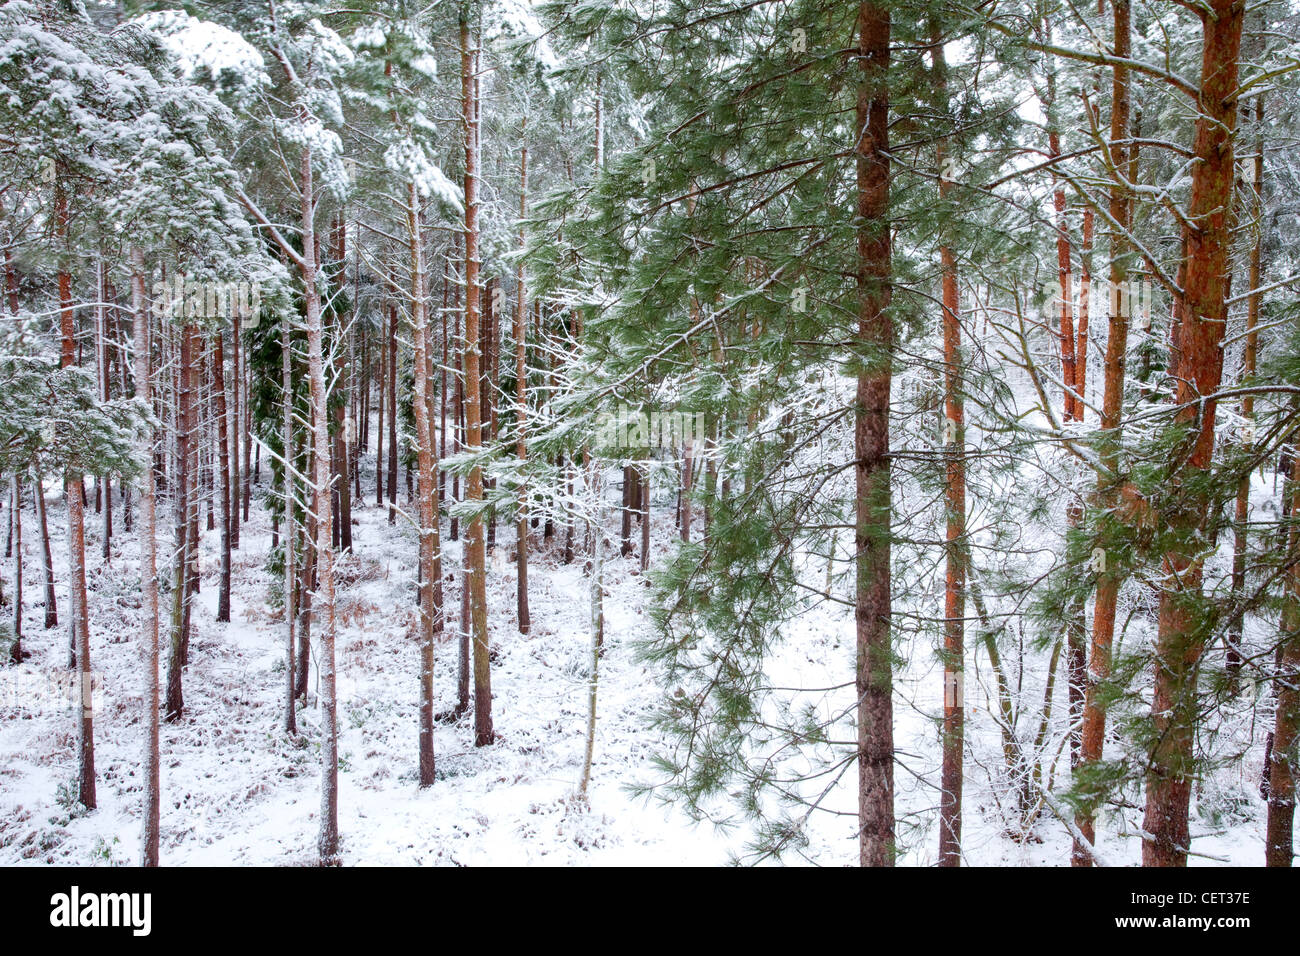 Snow covering woodland in Holt Country Park in Norfolk. Stock Photo